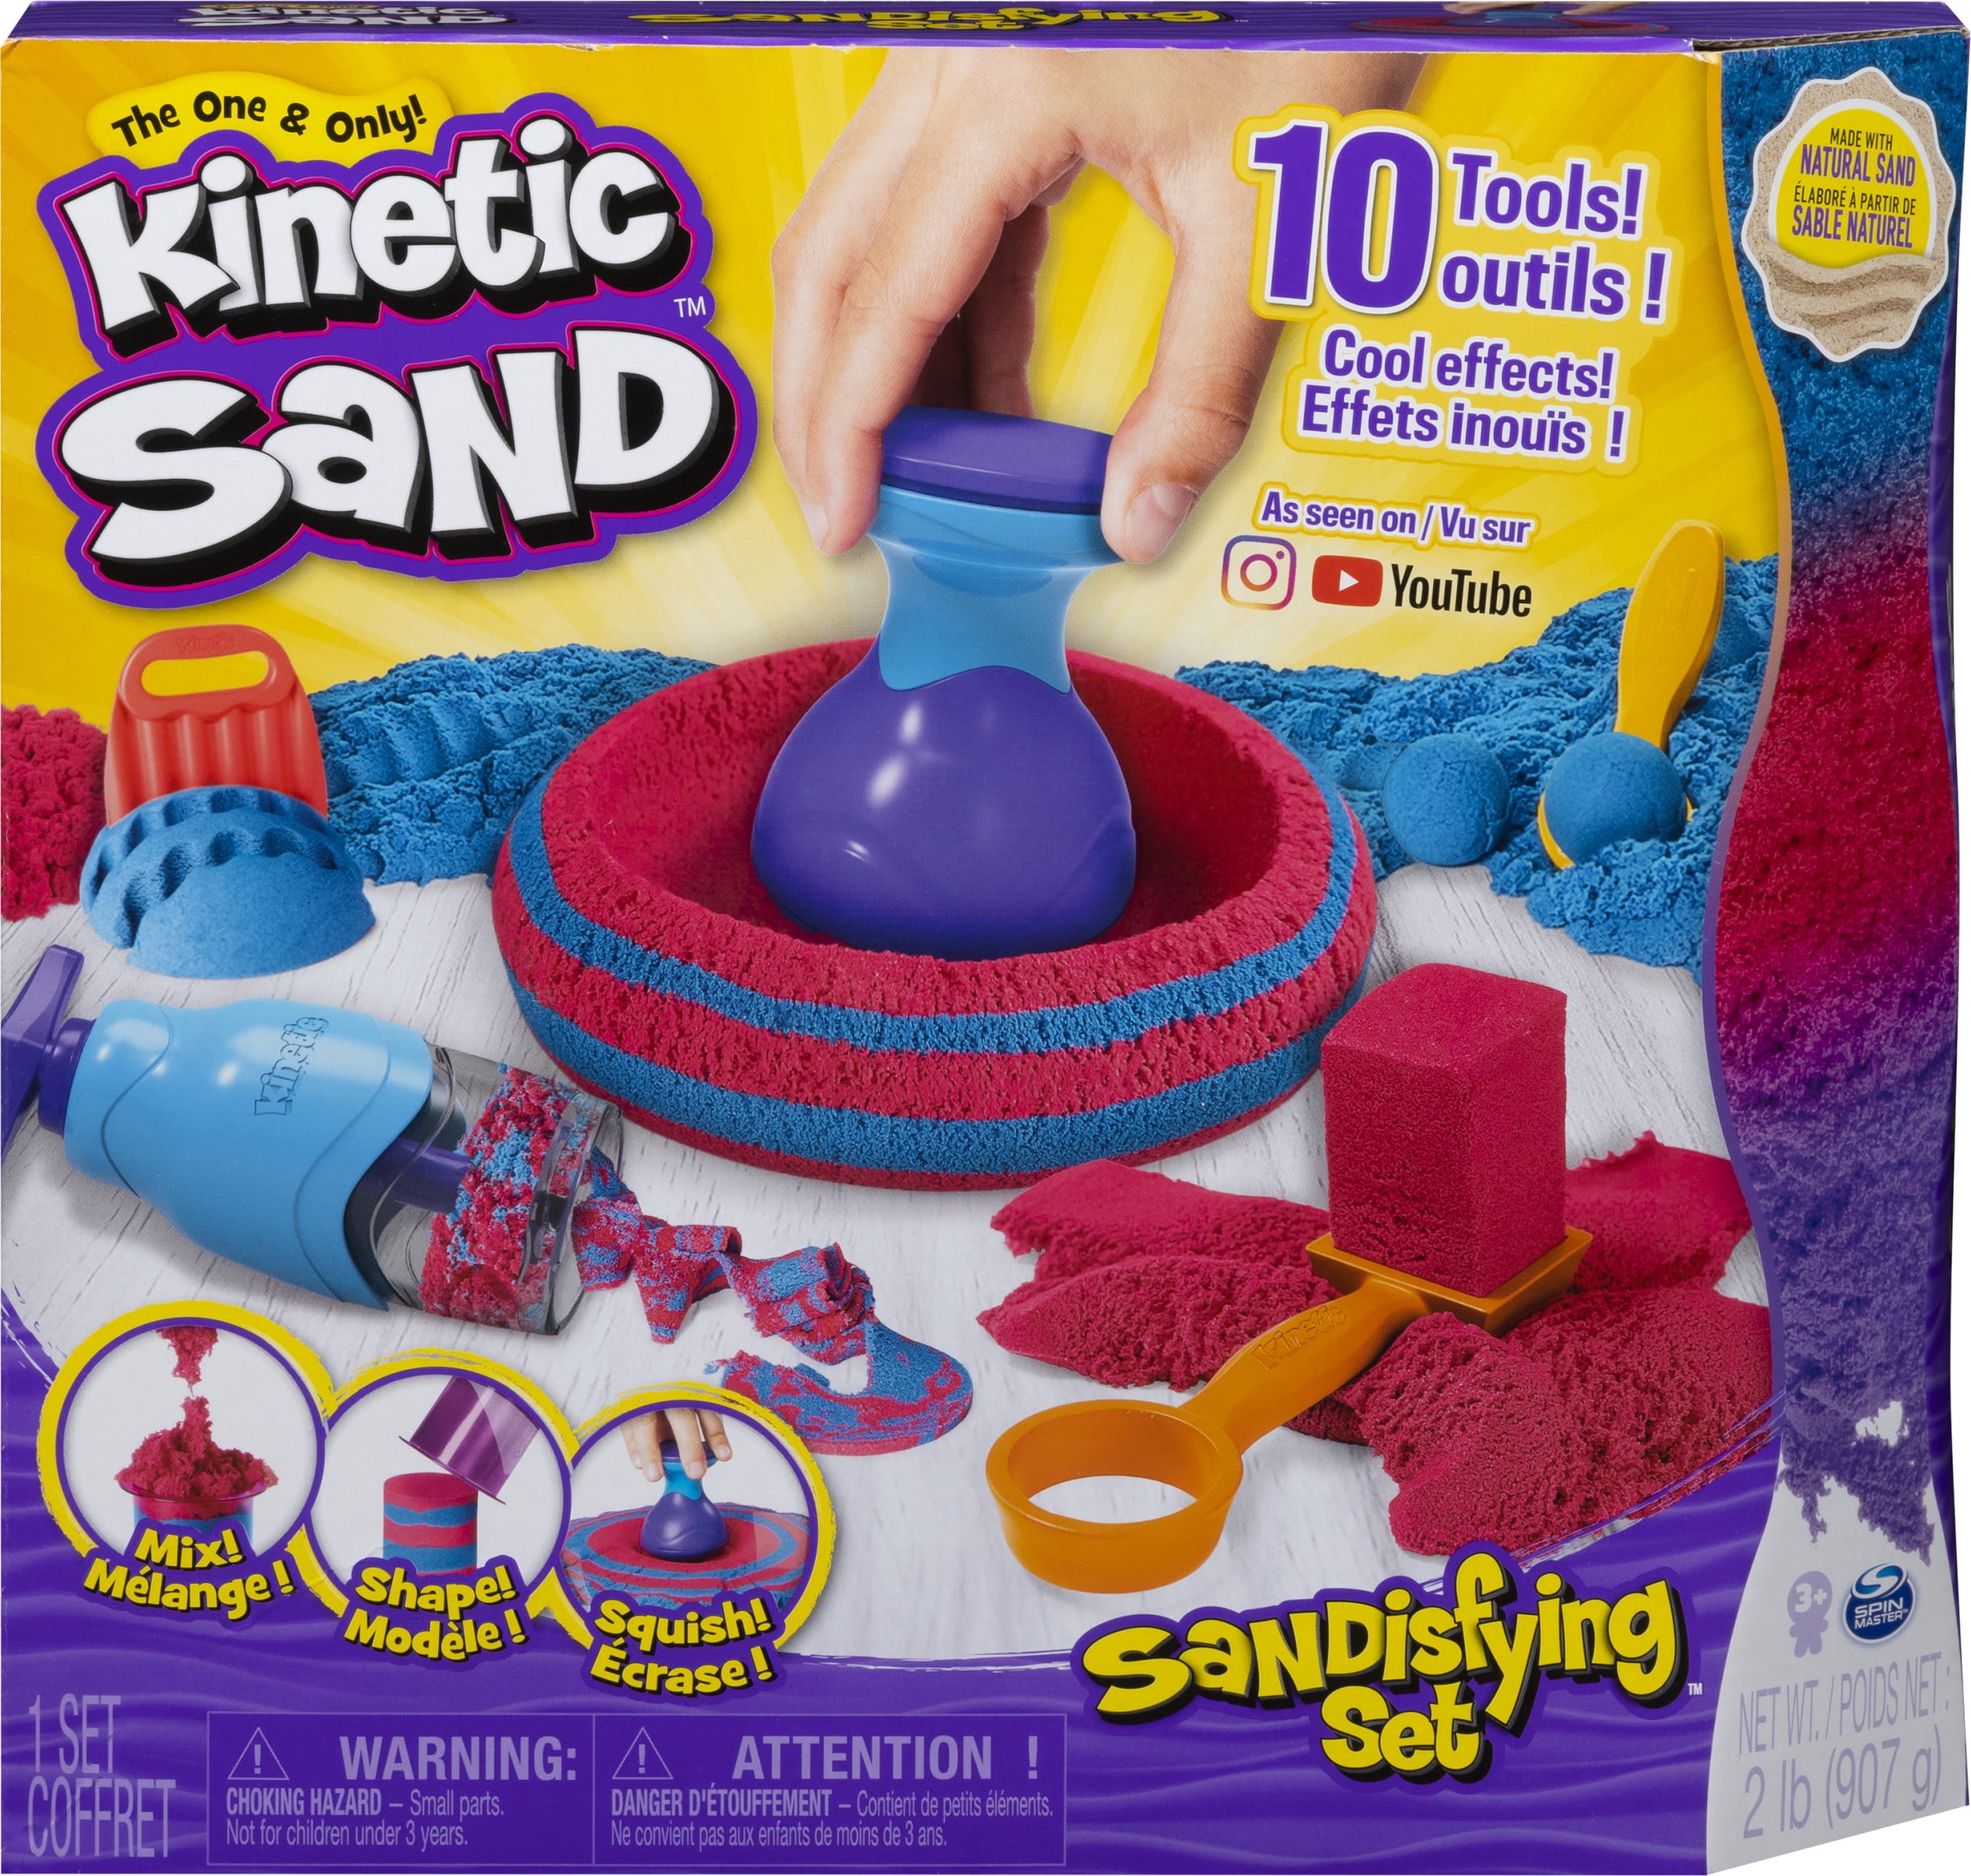 Kinetic Sand Sandisfying Set with 10 Different Tools & 2lbs of Sand 